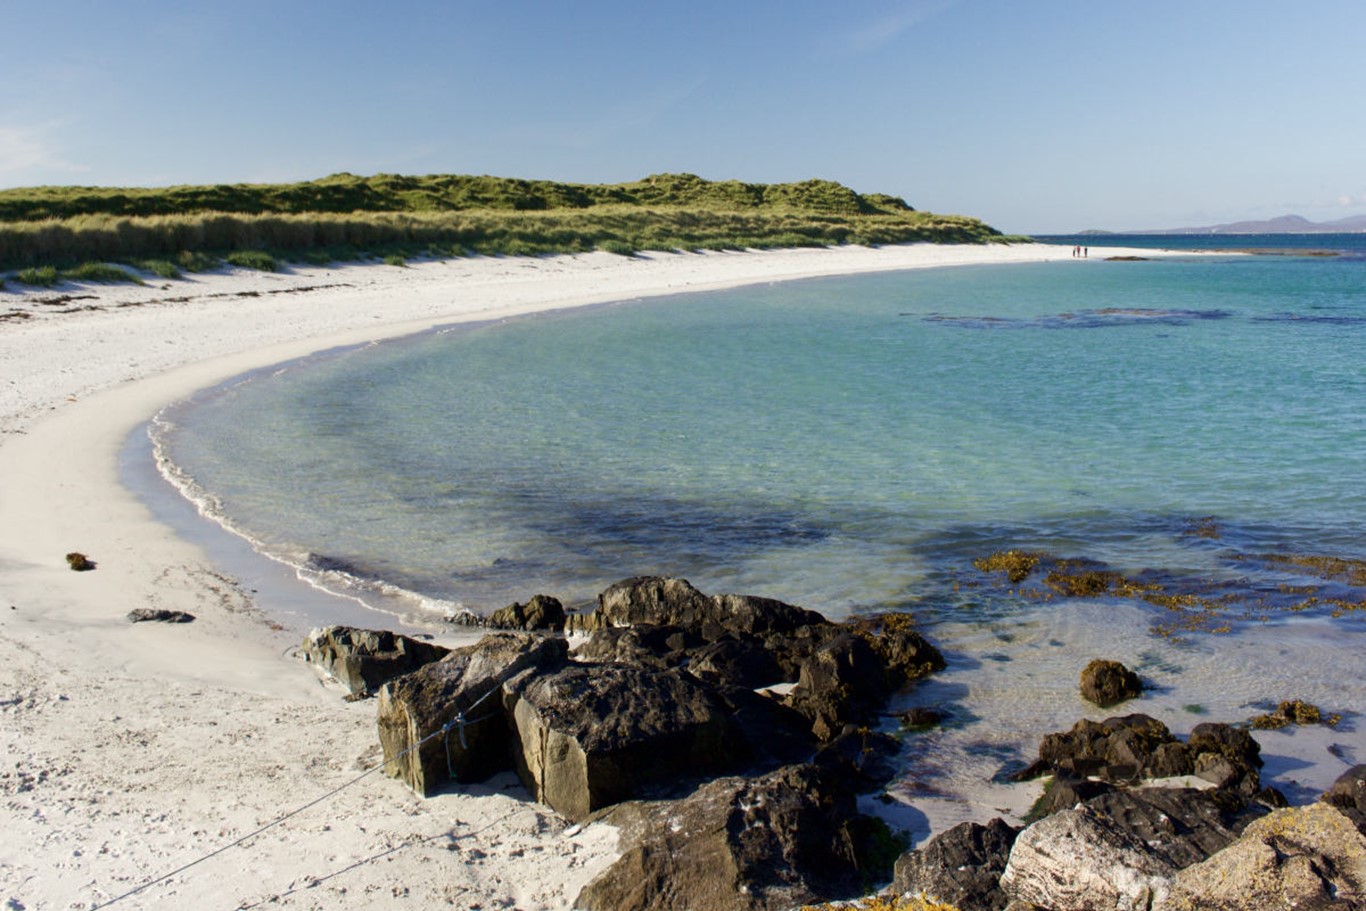 Glasgow: the gateway to Barra, Tiree and Campbeltown